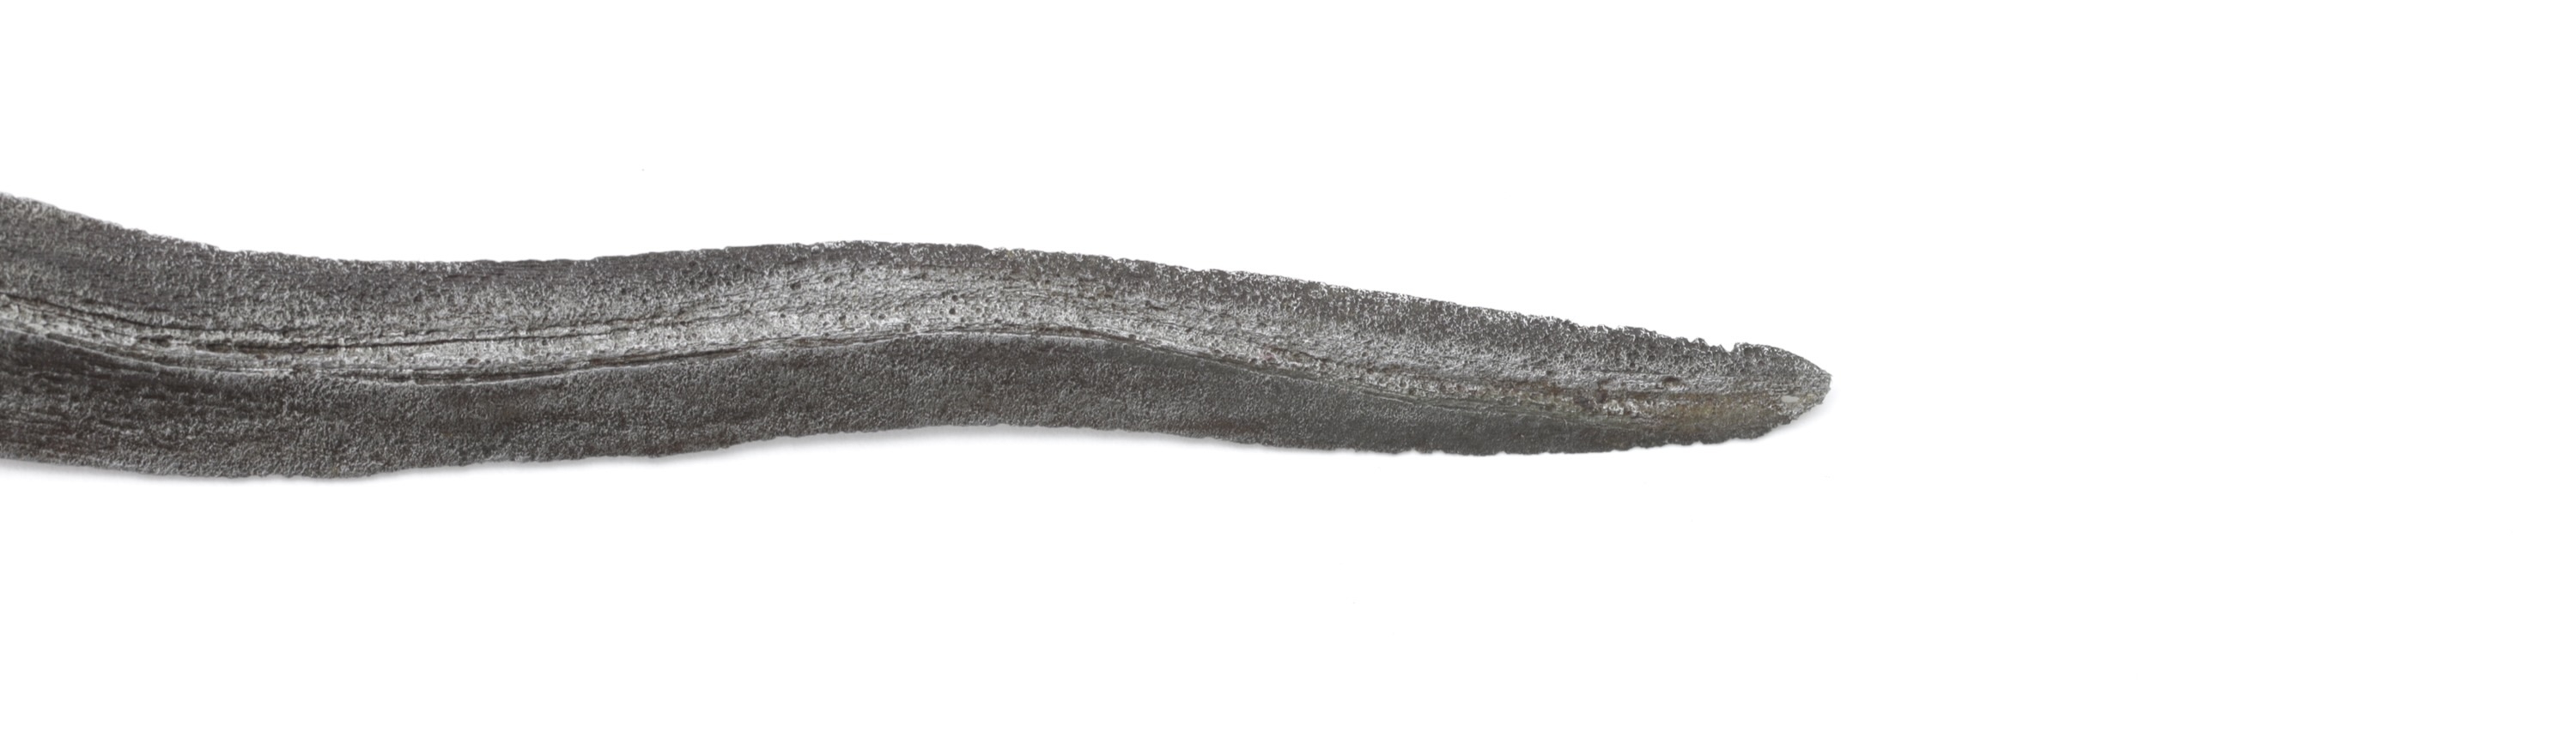 Early silver hilted keris coteng from Songhkla